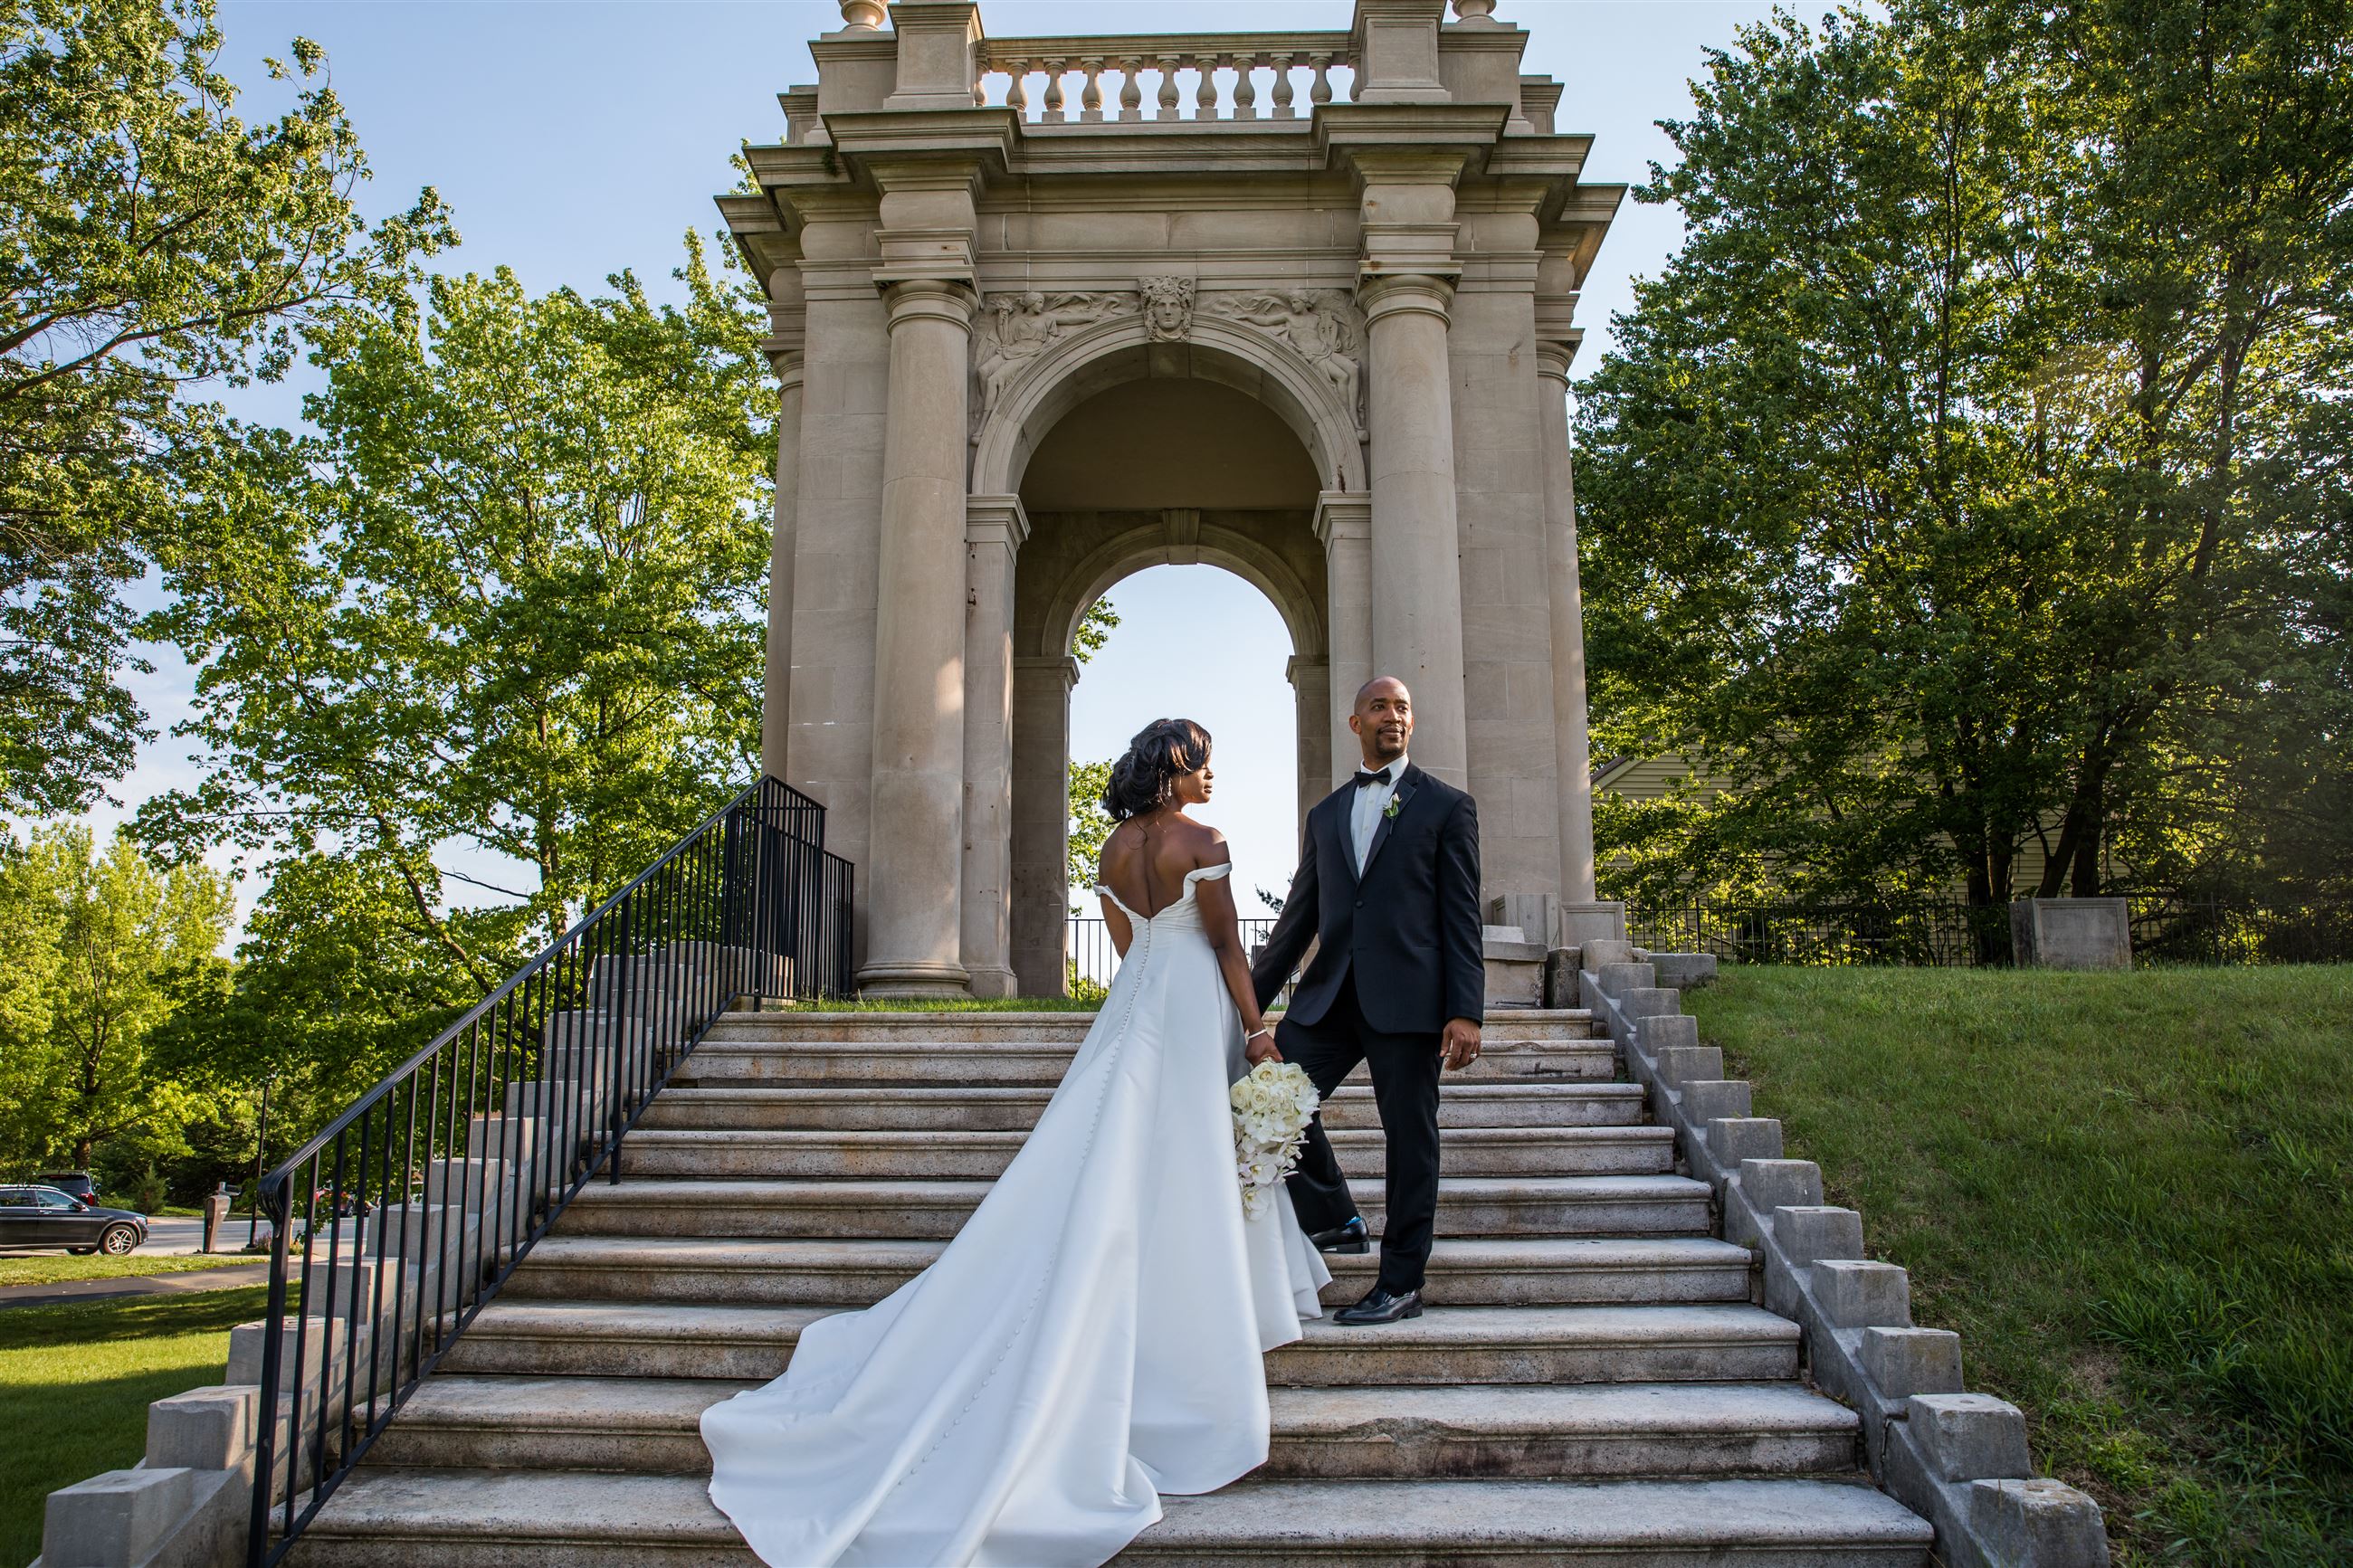 Inspiring Couple Kerry-Anne and Michael Gordon Tie The Knot In This Beautiful Philadelphia Wedding